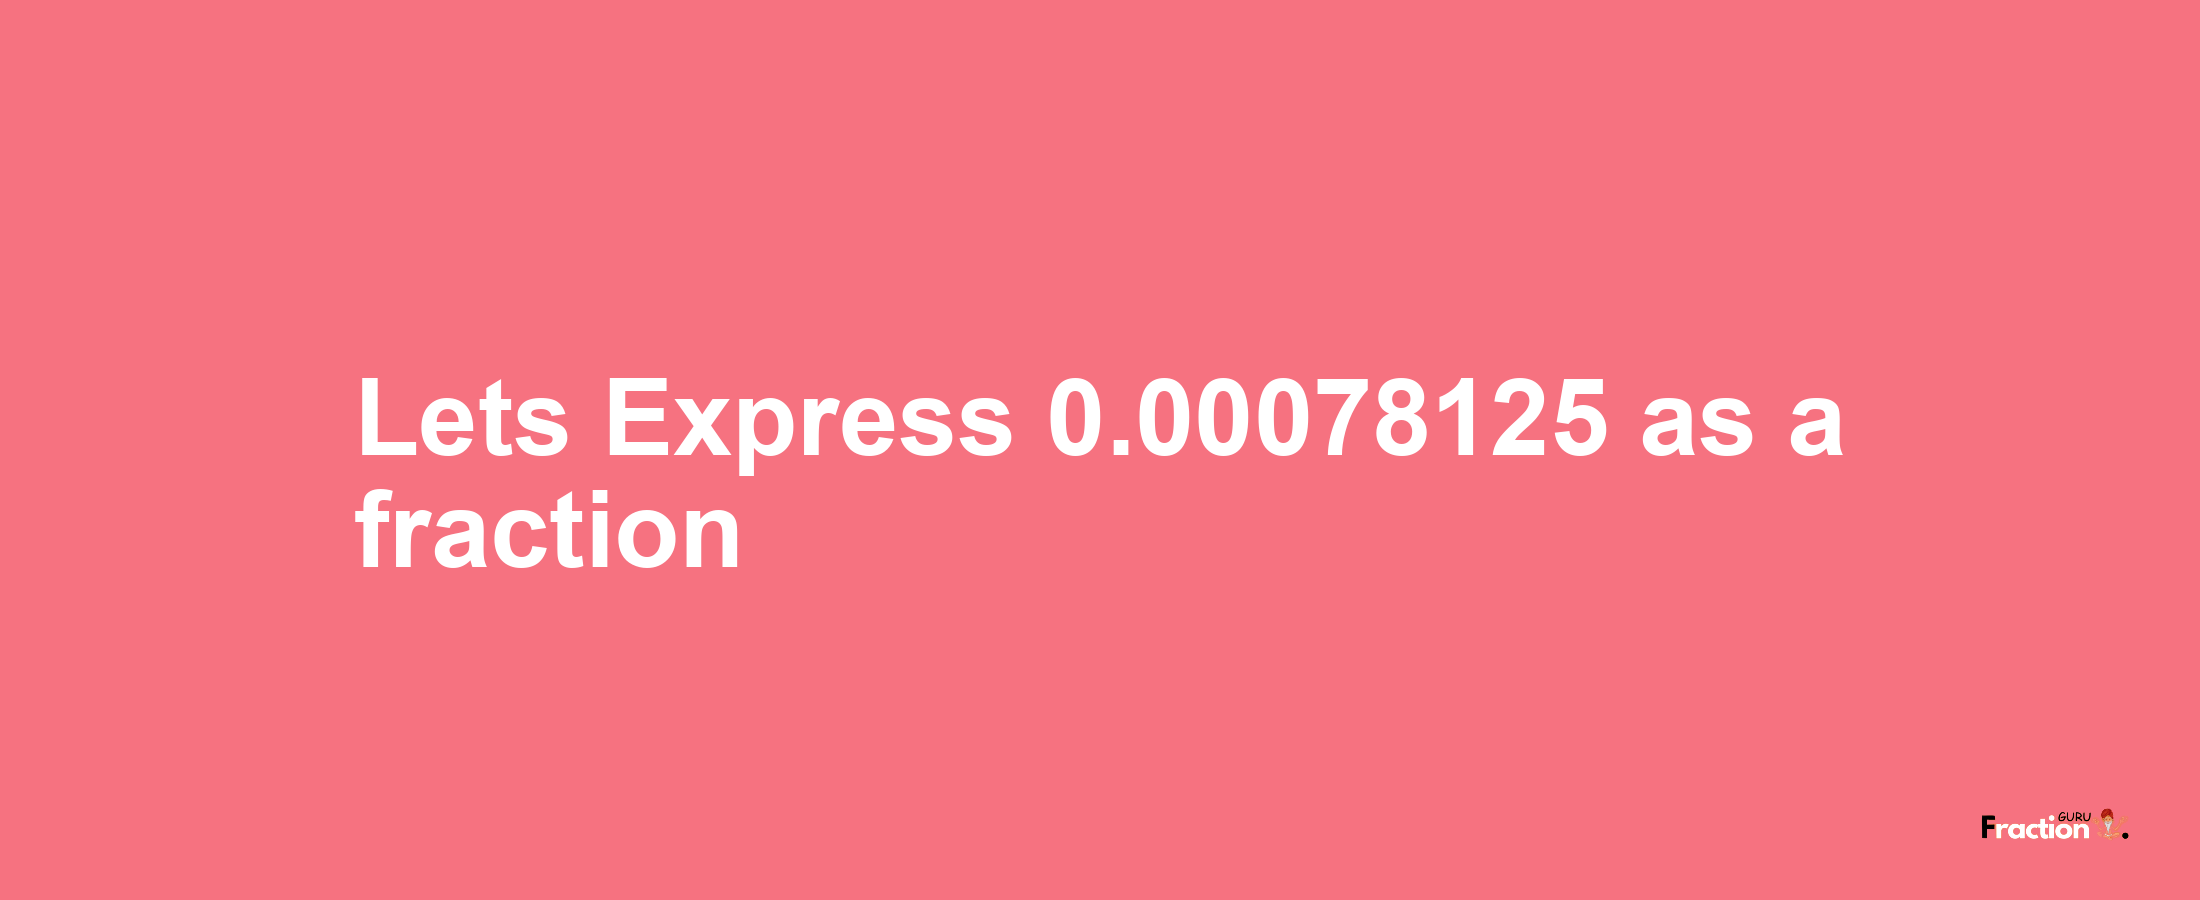 Lets Express 0.00078125 as afraction